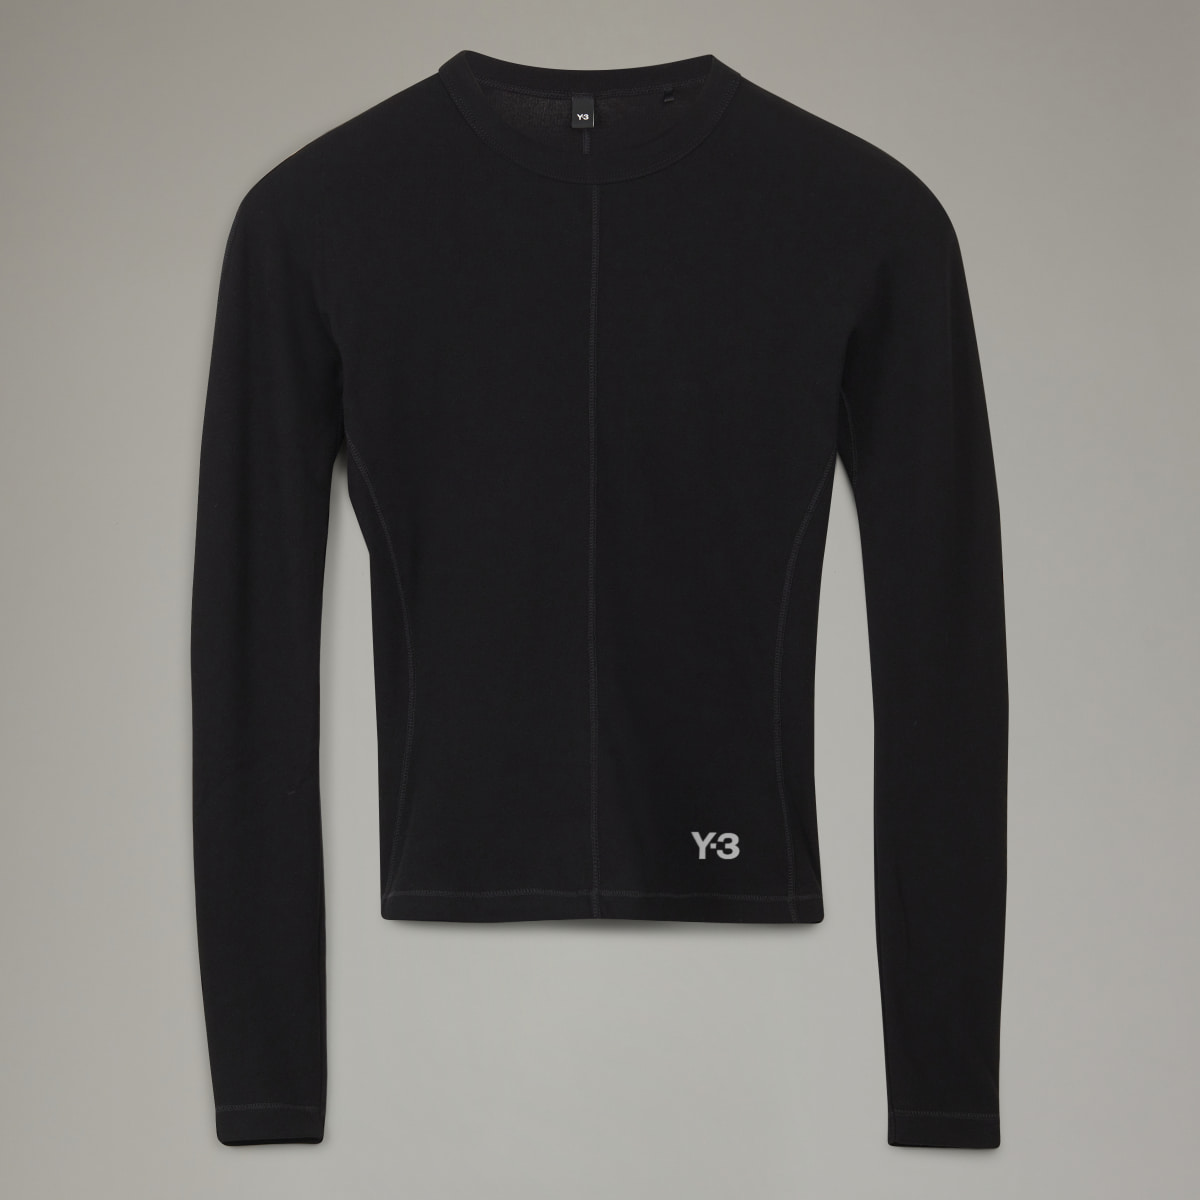 Adidas Y-3 Fitted Long Sleeve Long-Sleeve Top. 5